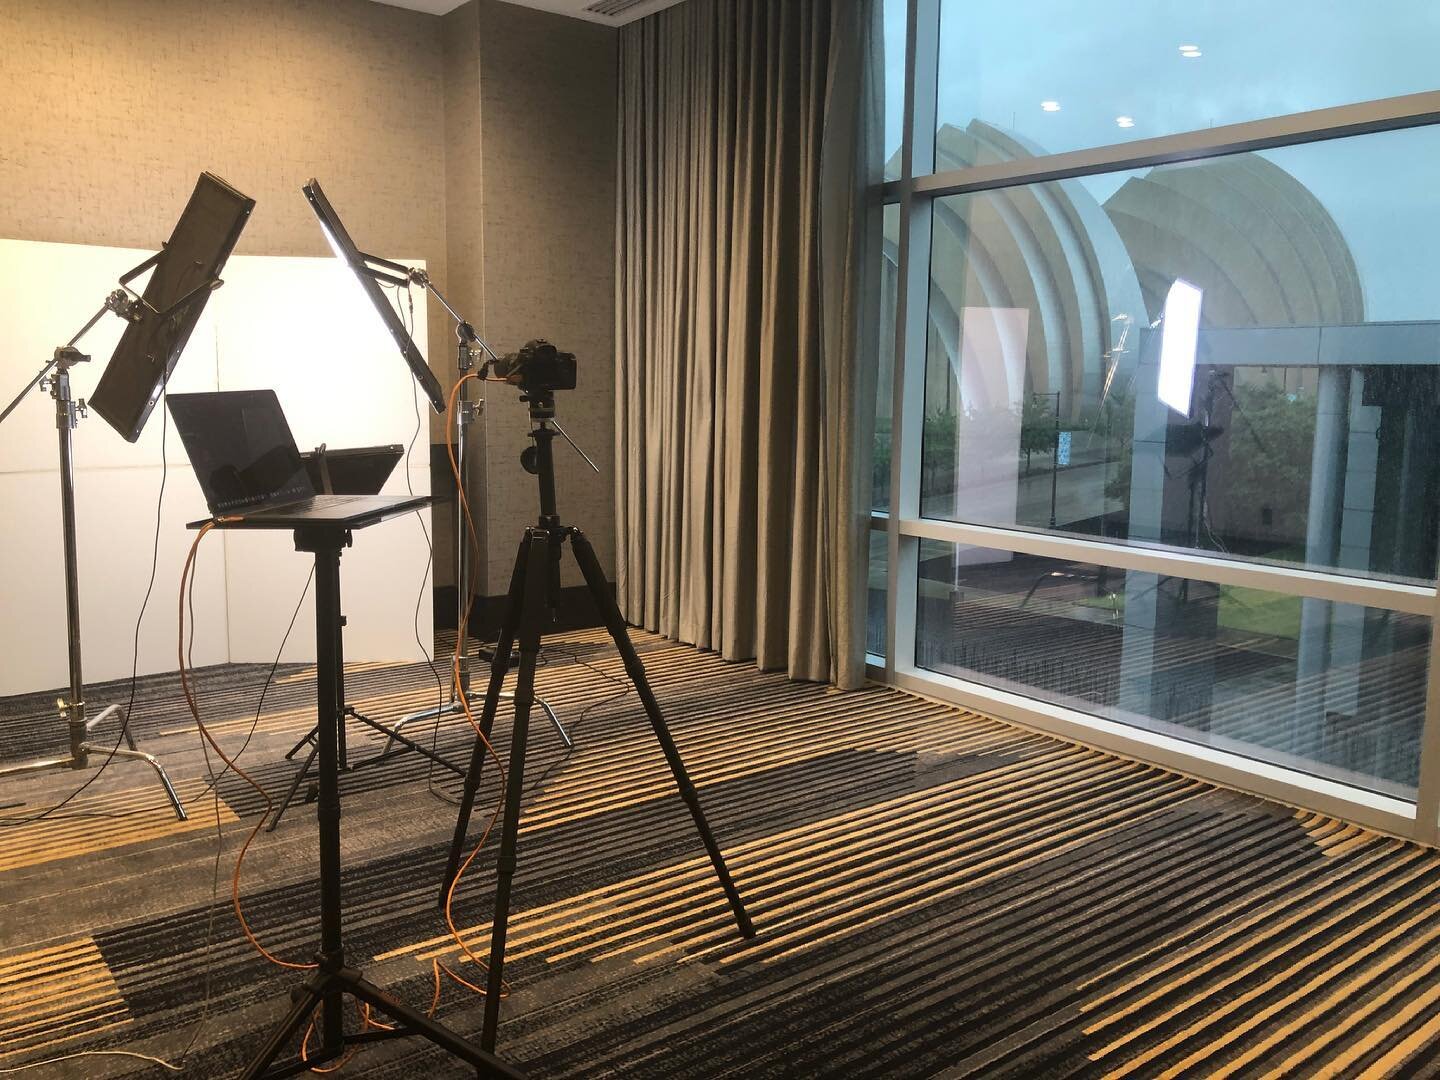 Office this morning to do #corporate #headshots for a company here in #kansascity. Nice view of the @kauffmancenter from the @loewskc #spiritoffreedom room. 
.
.
.
.
.
.
.
.
.
.
#kc #kcmo #headshot #headshotphotographer #headshotphotography #headshot